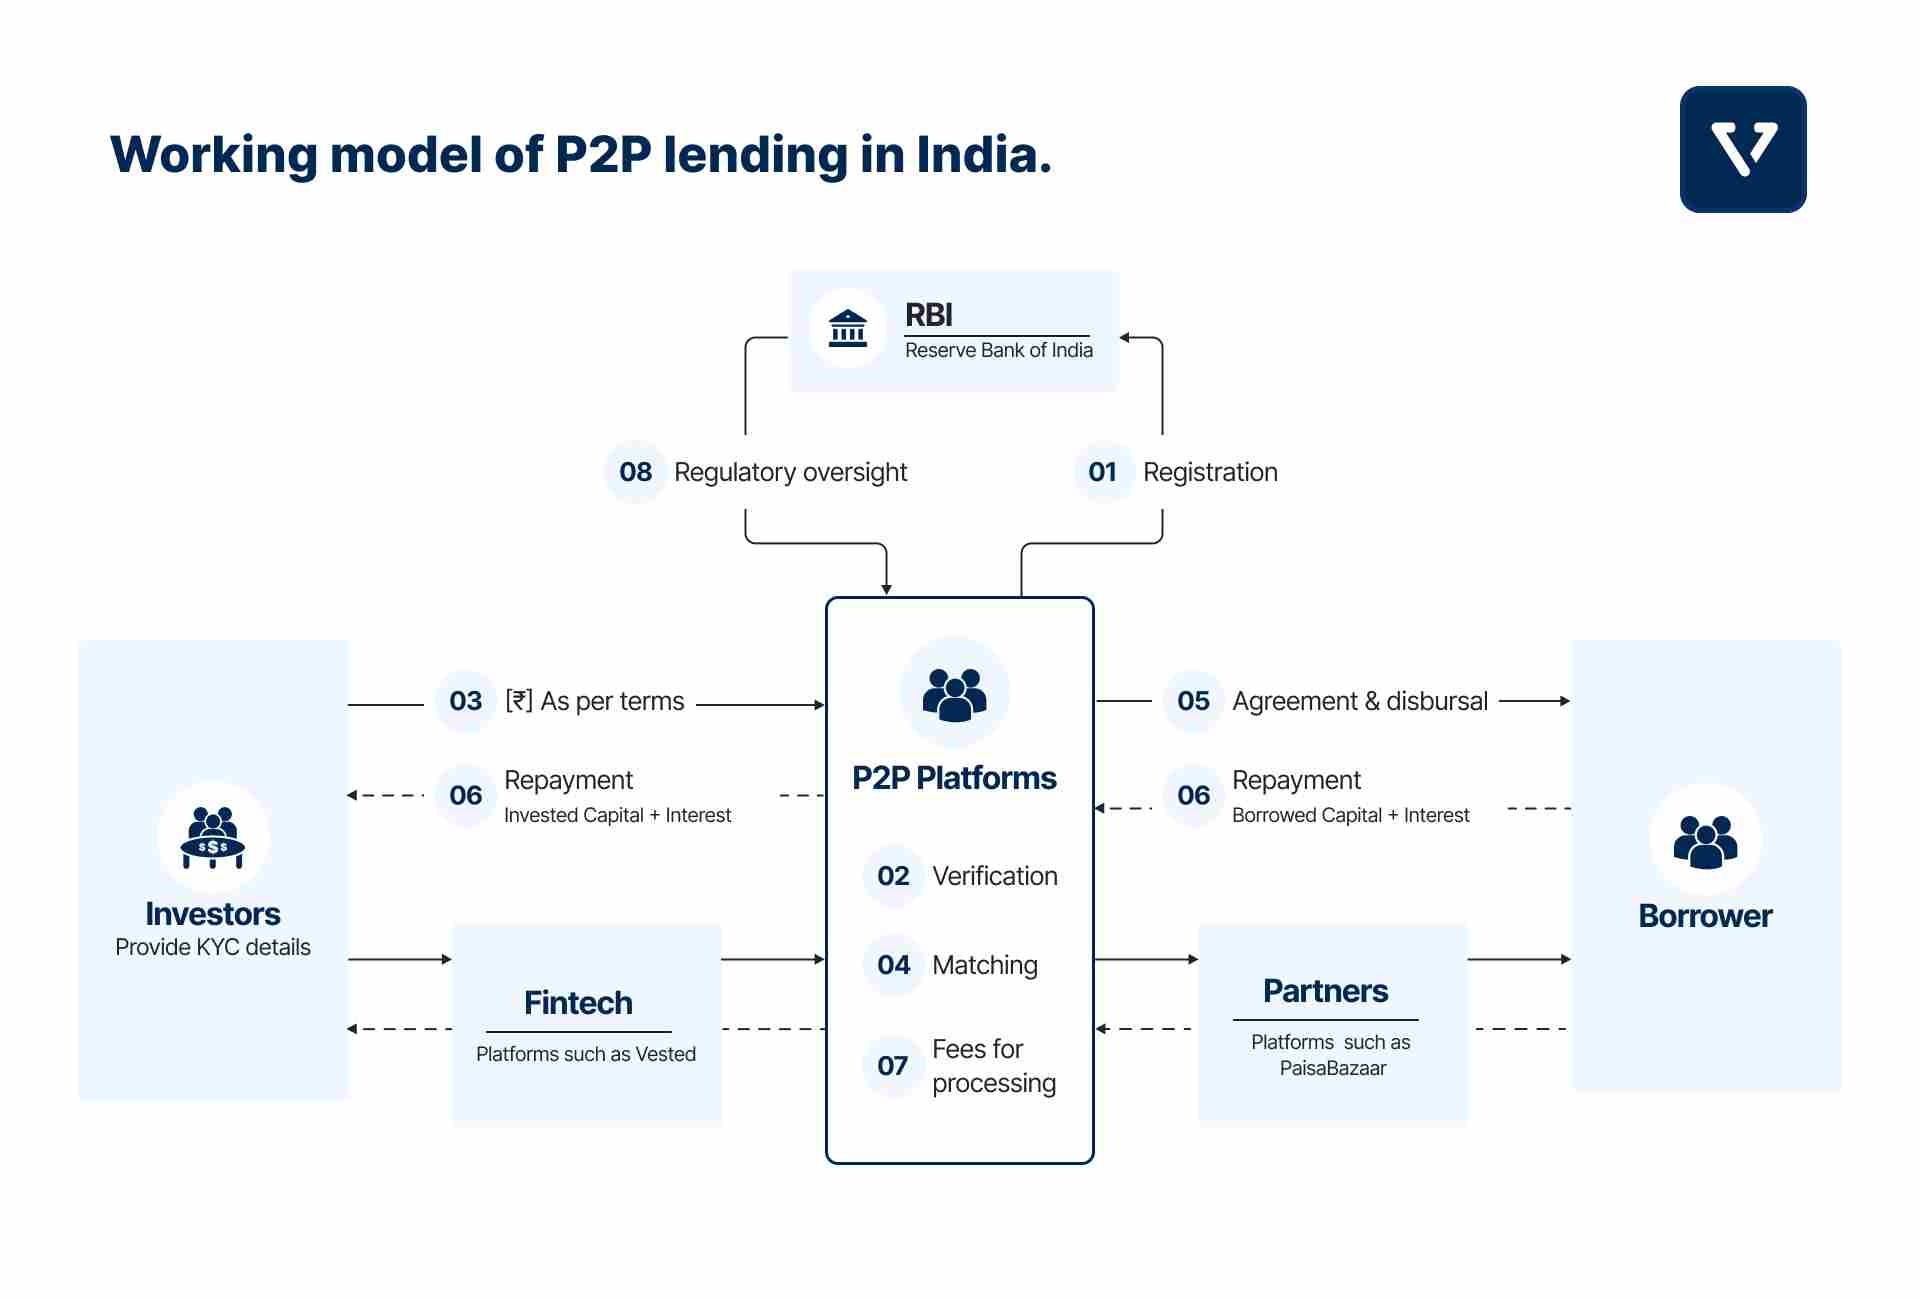 Figure 1: Working model of P2P lending in India. For reference to the numbers in the above image, visit Chapter 1 